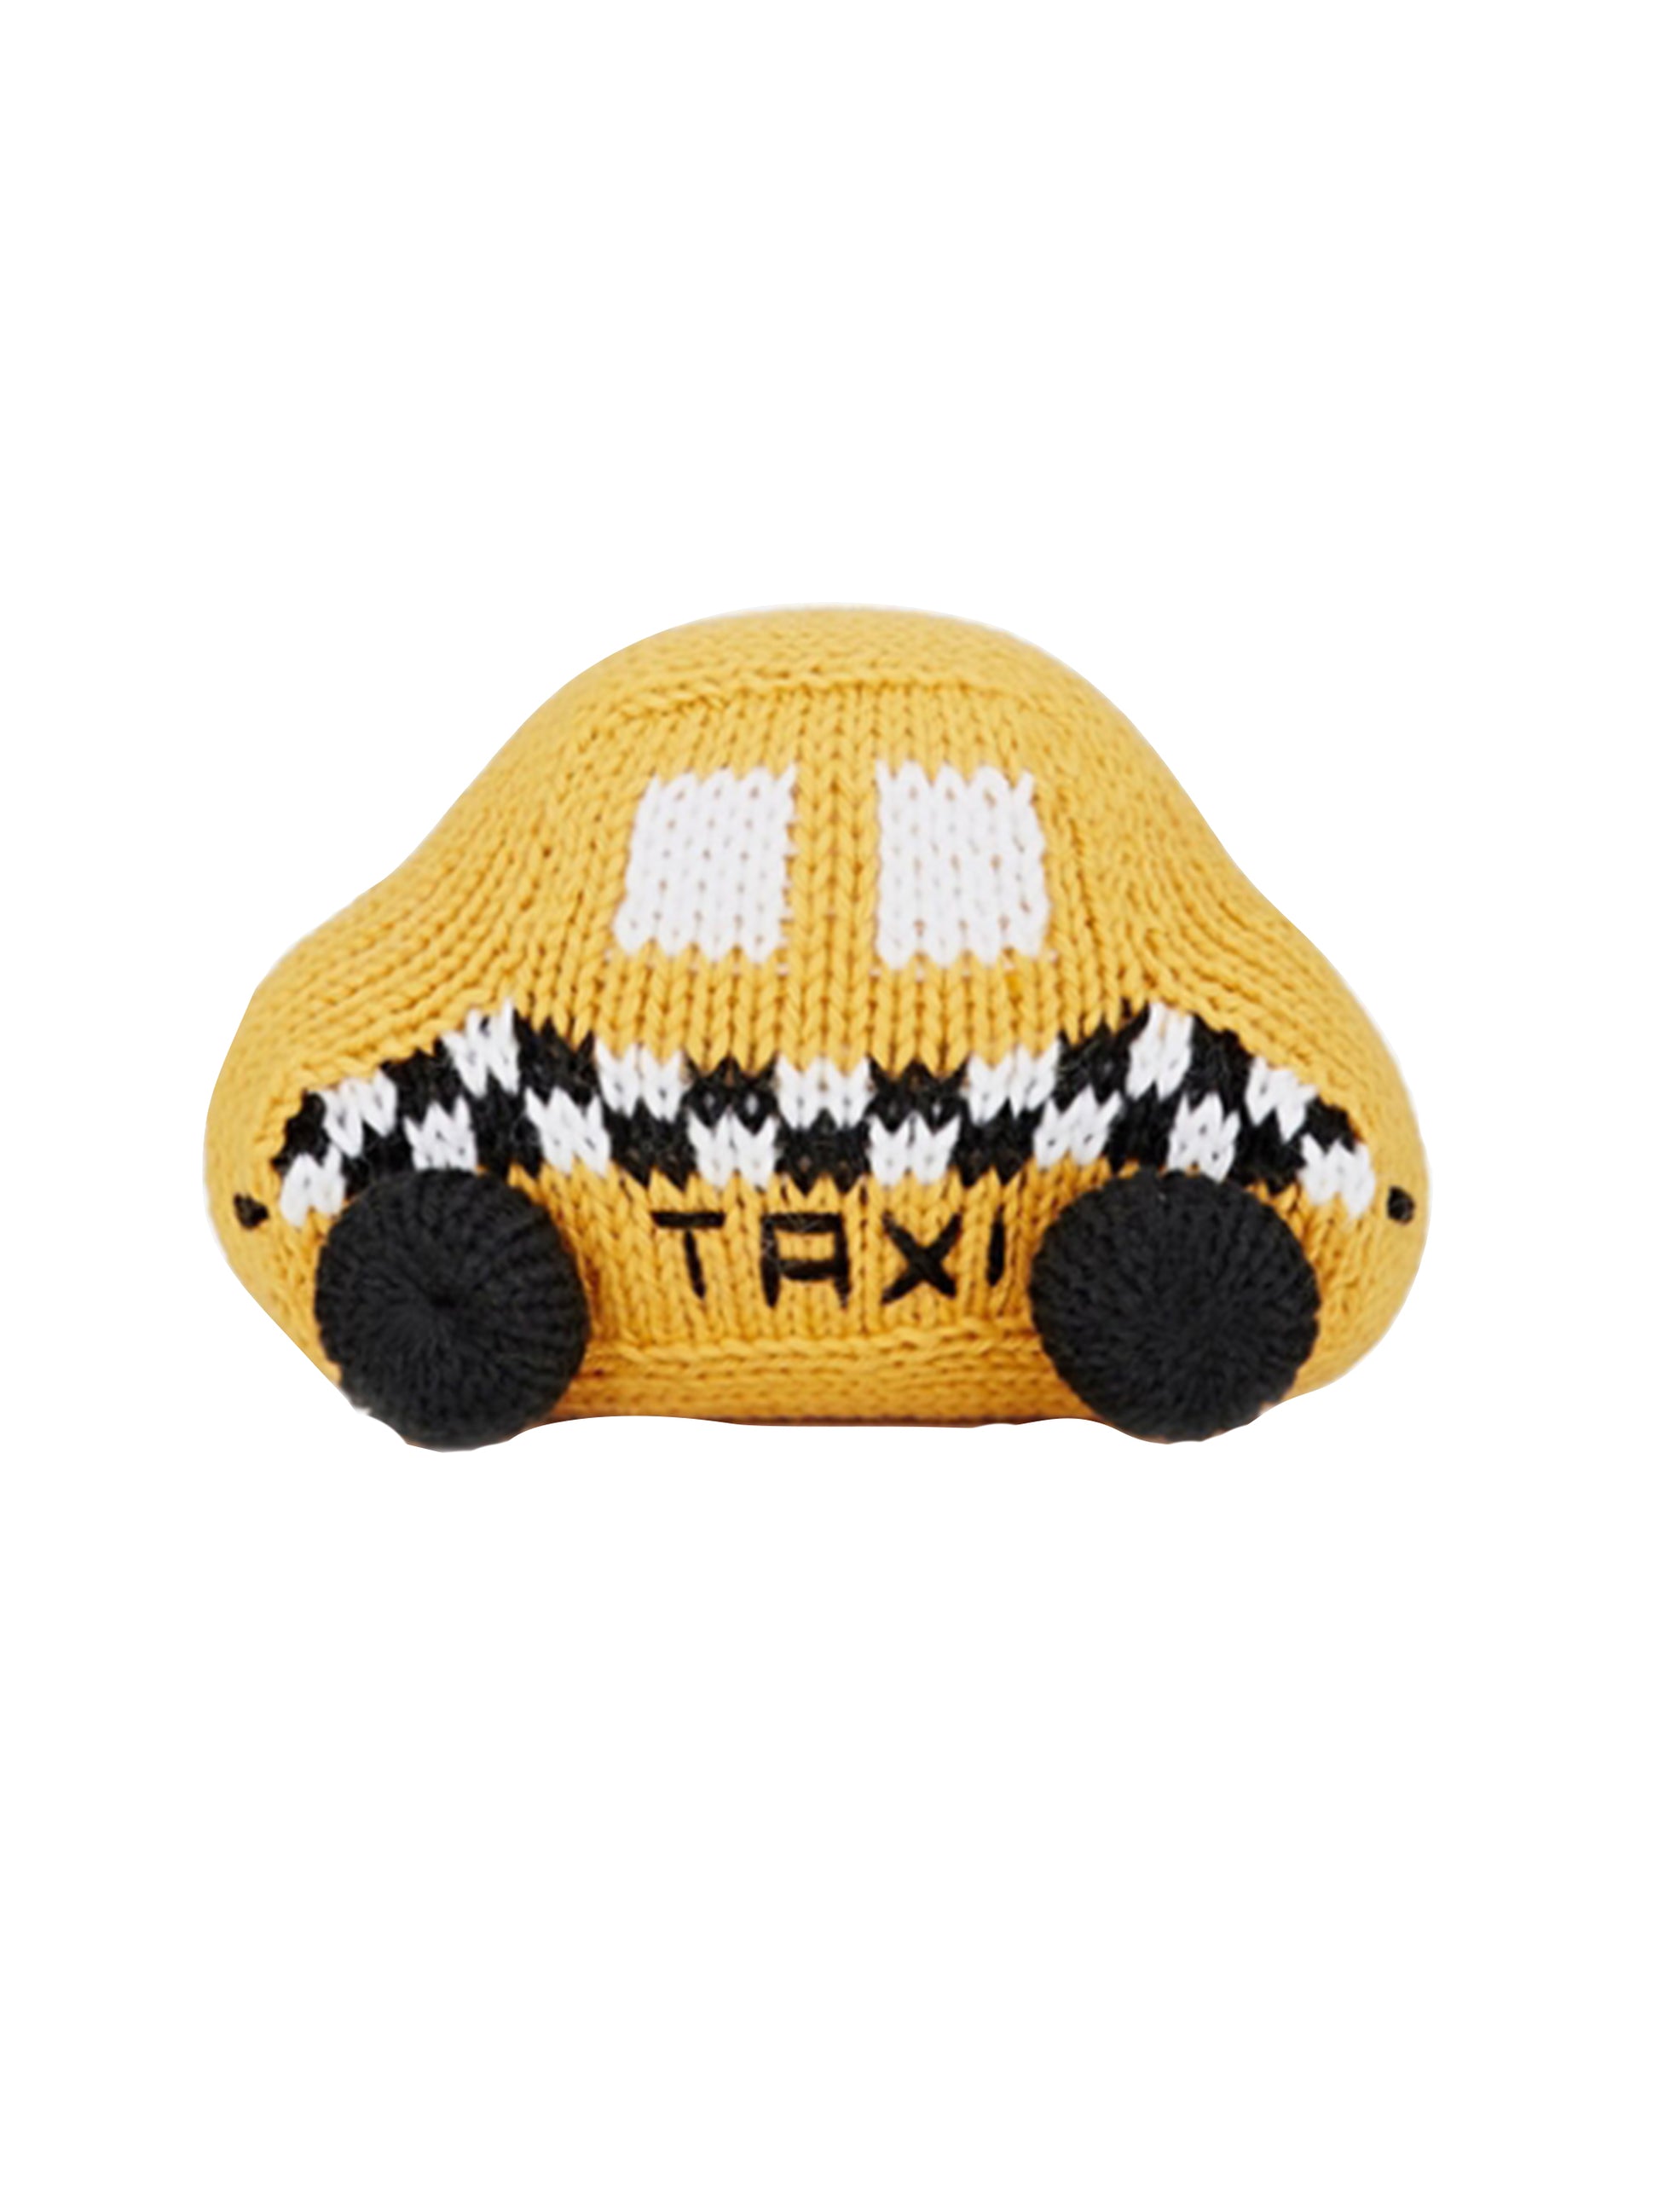 Taxi Toy Weston Table